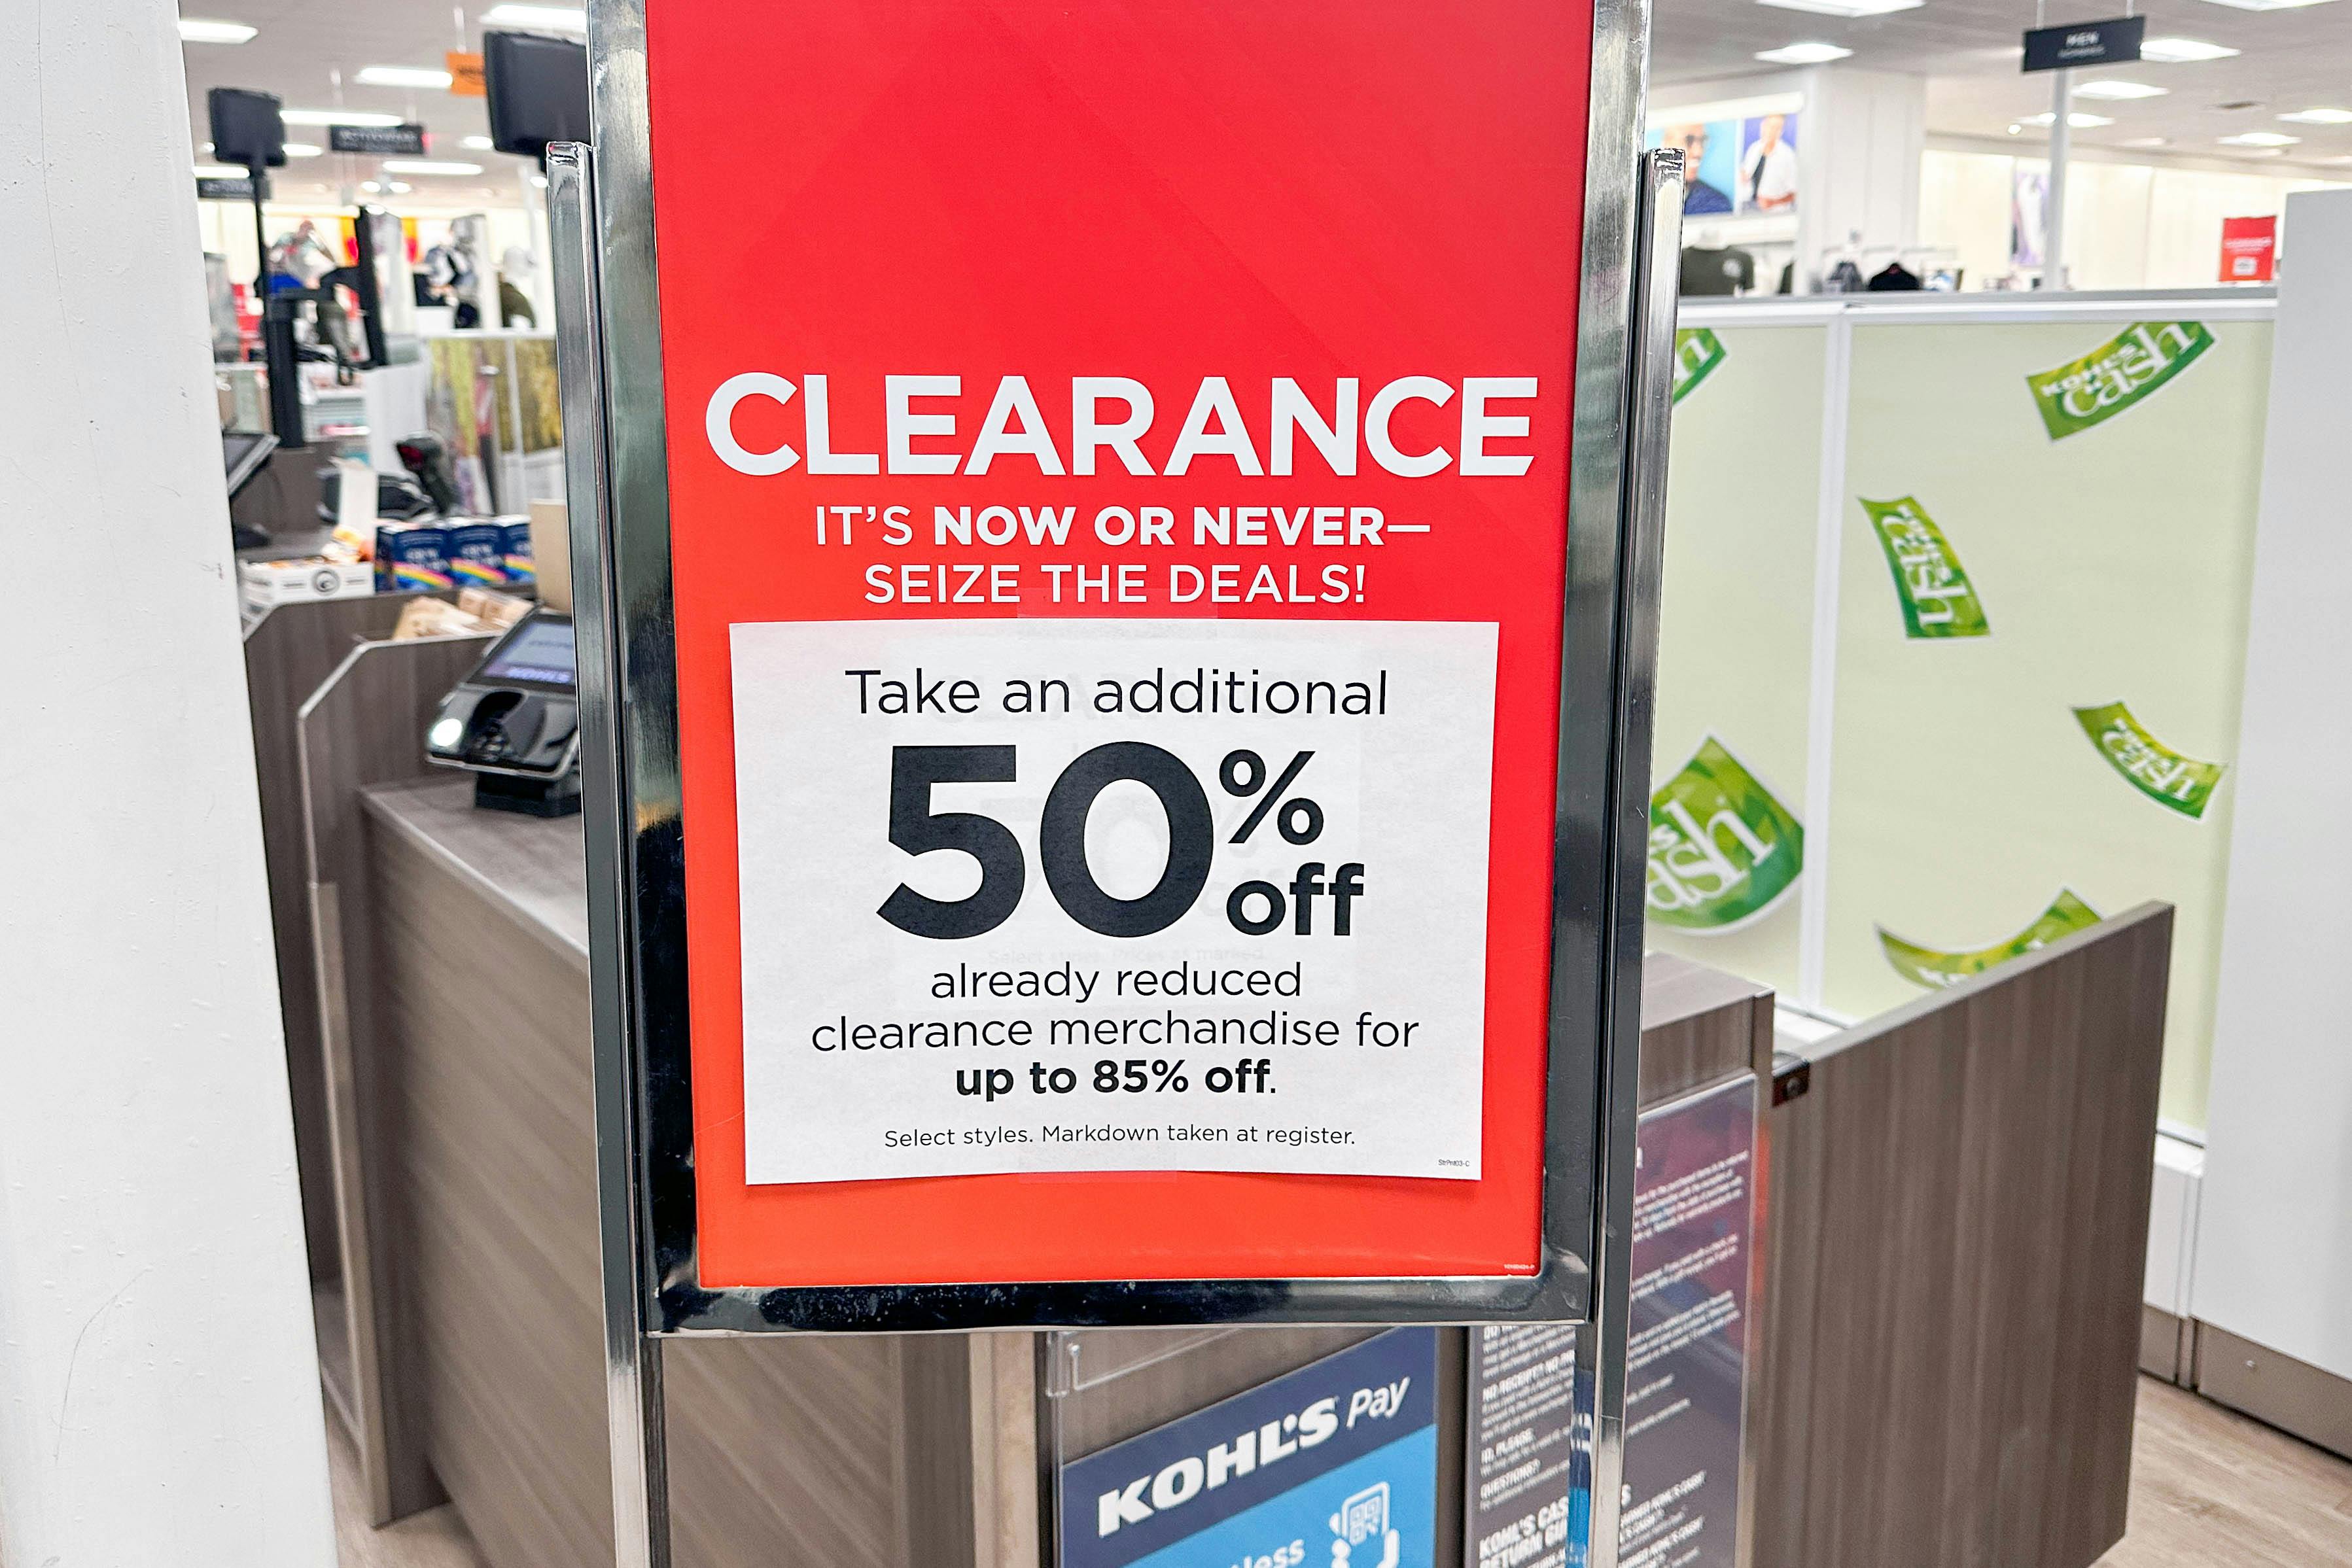 Kohls Biggest Clearance Event up to 80% Off - Clothes for $2 - Daily Deals  & Coupons